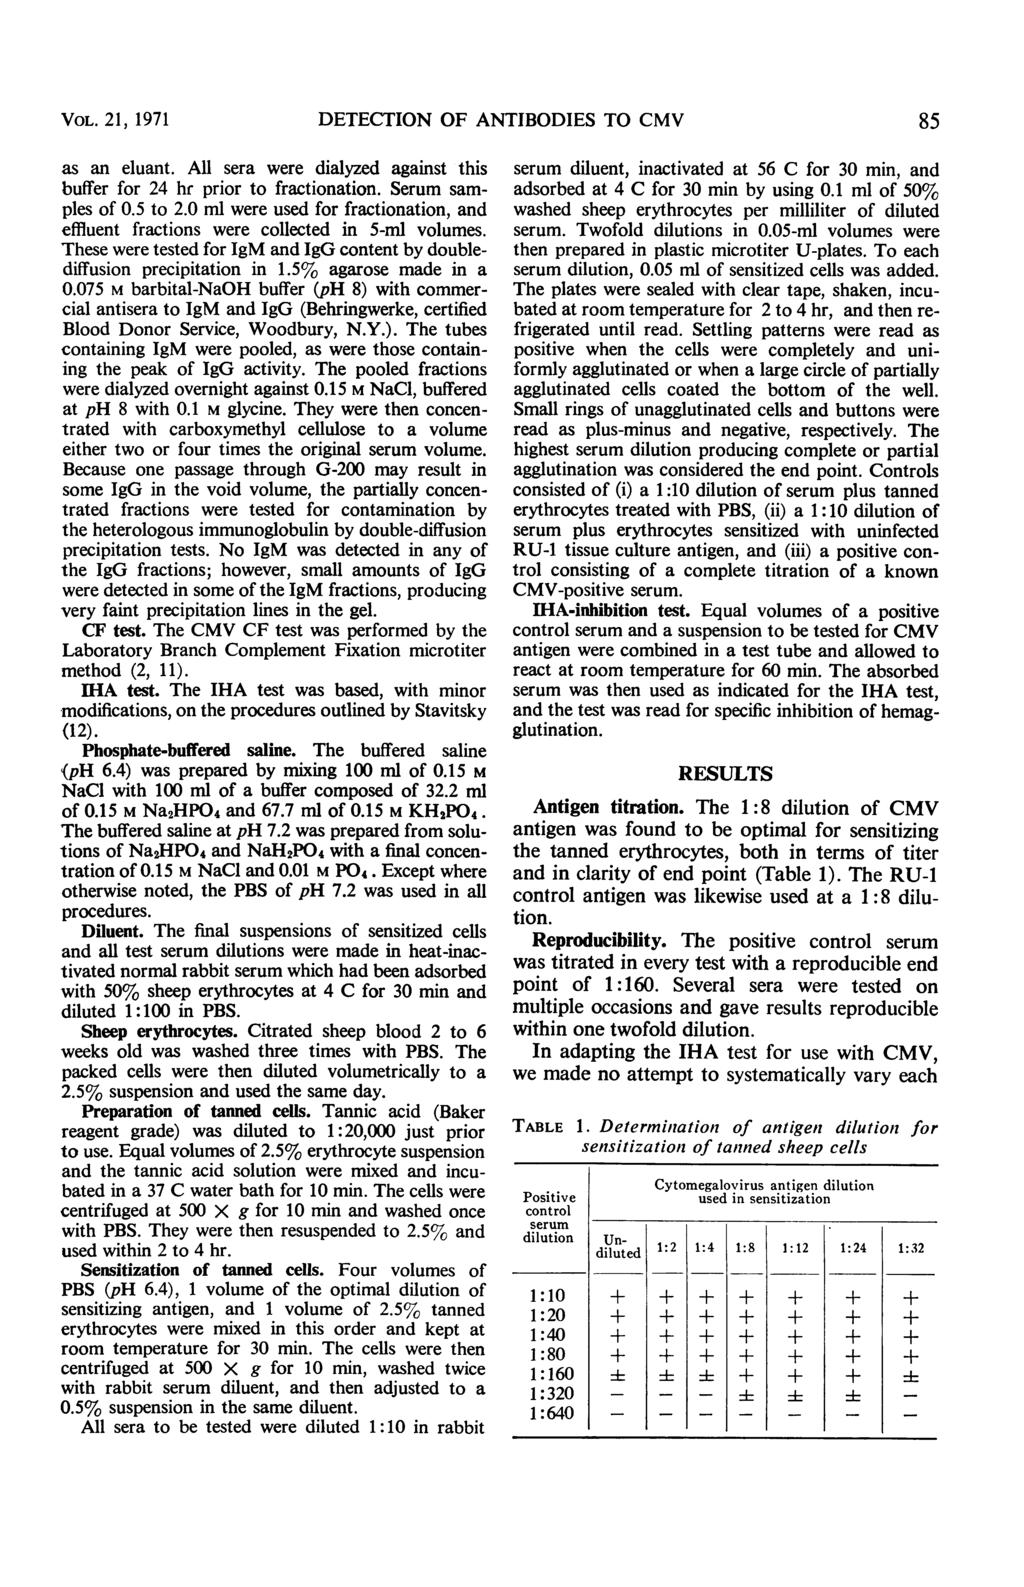 VOL. 21, 1971 DETECTION OF ANTIBODIES TO CMV 85 as an eluant. All sera were dialyzed against this buffer for 24 hr prior to fractionation. Serum samples of 0.5 to 2.